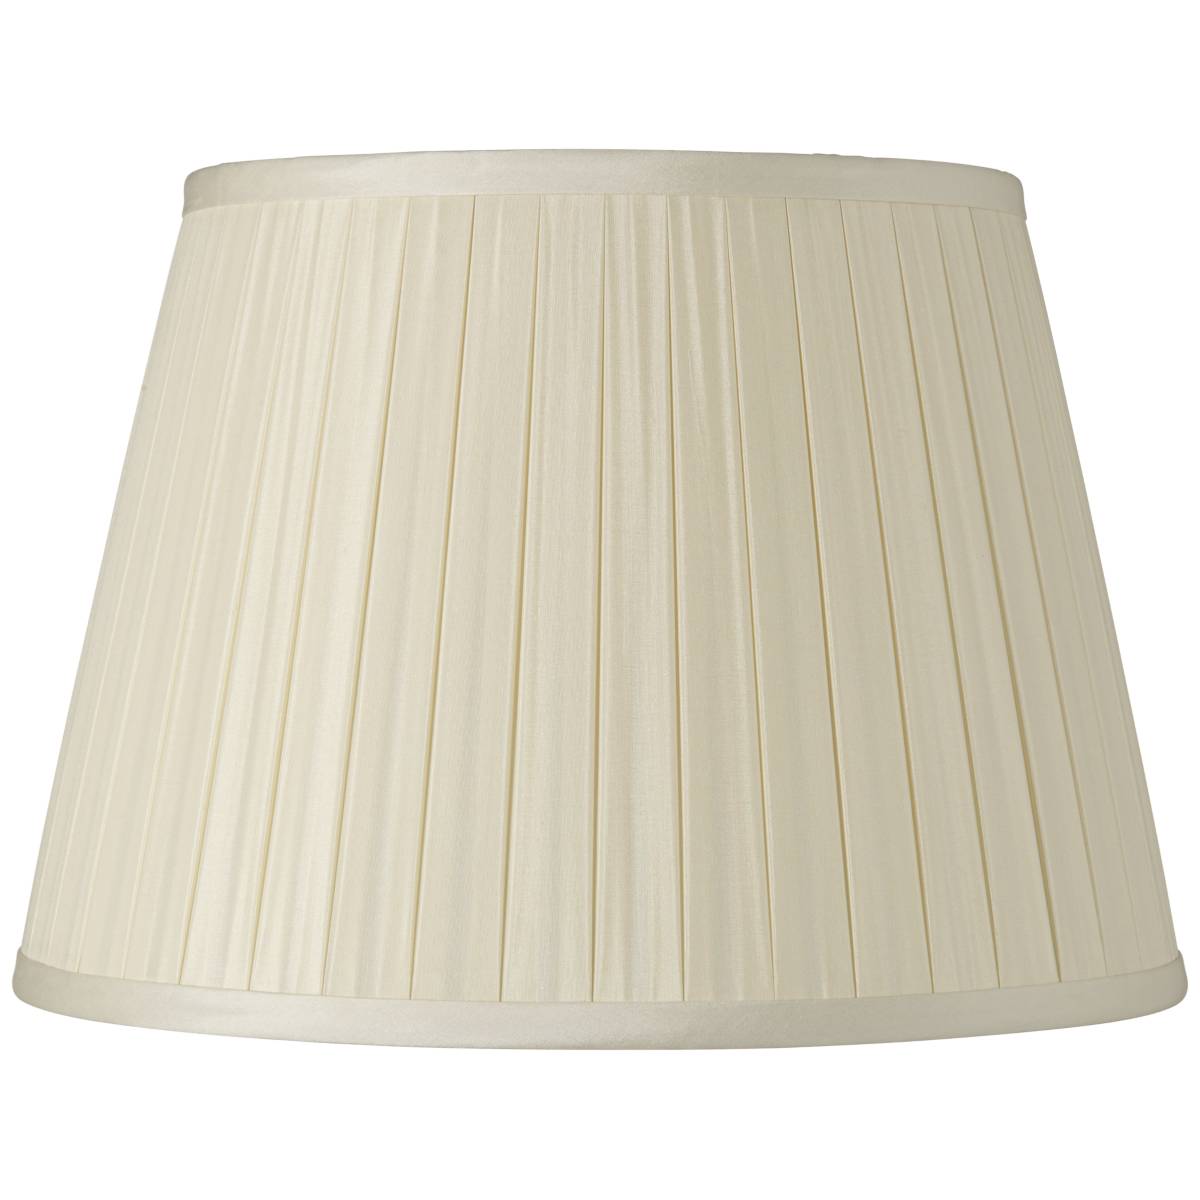 17 Inch And Up - Large Table And Floor Lamps, Naturals, Pleated, Lamp ...